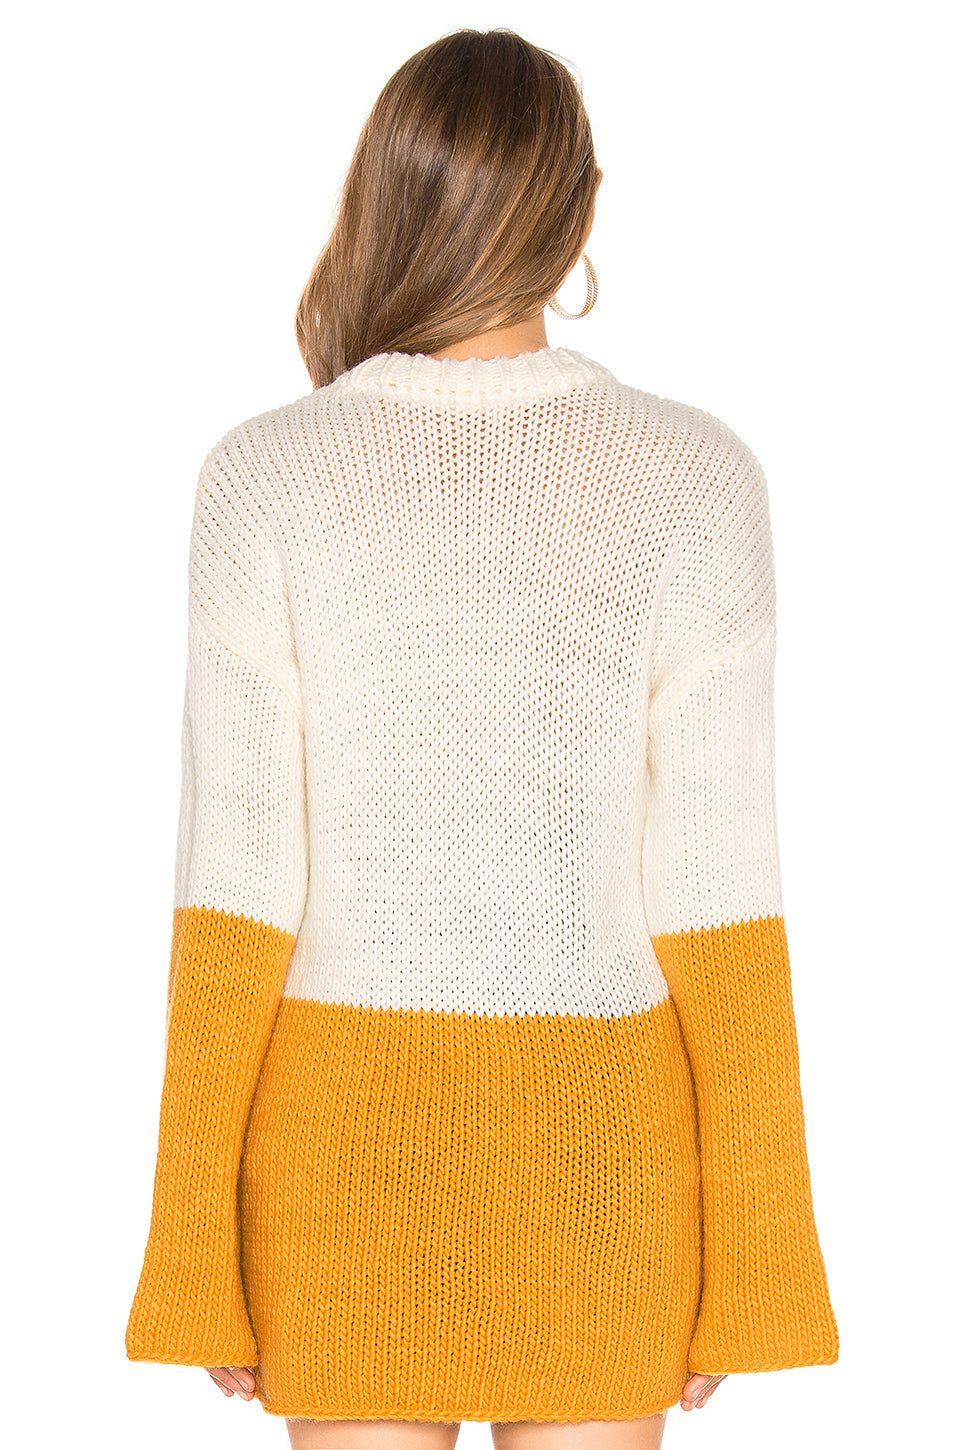 Roux Sweater in MUSTARD & IVORY